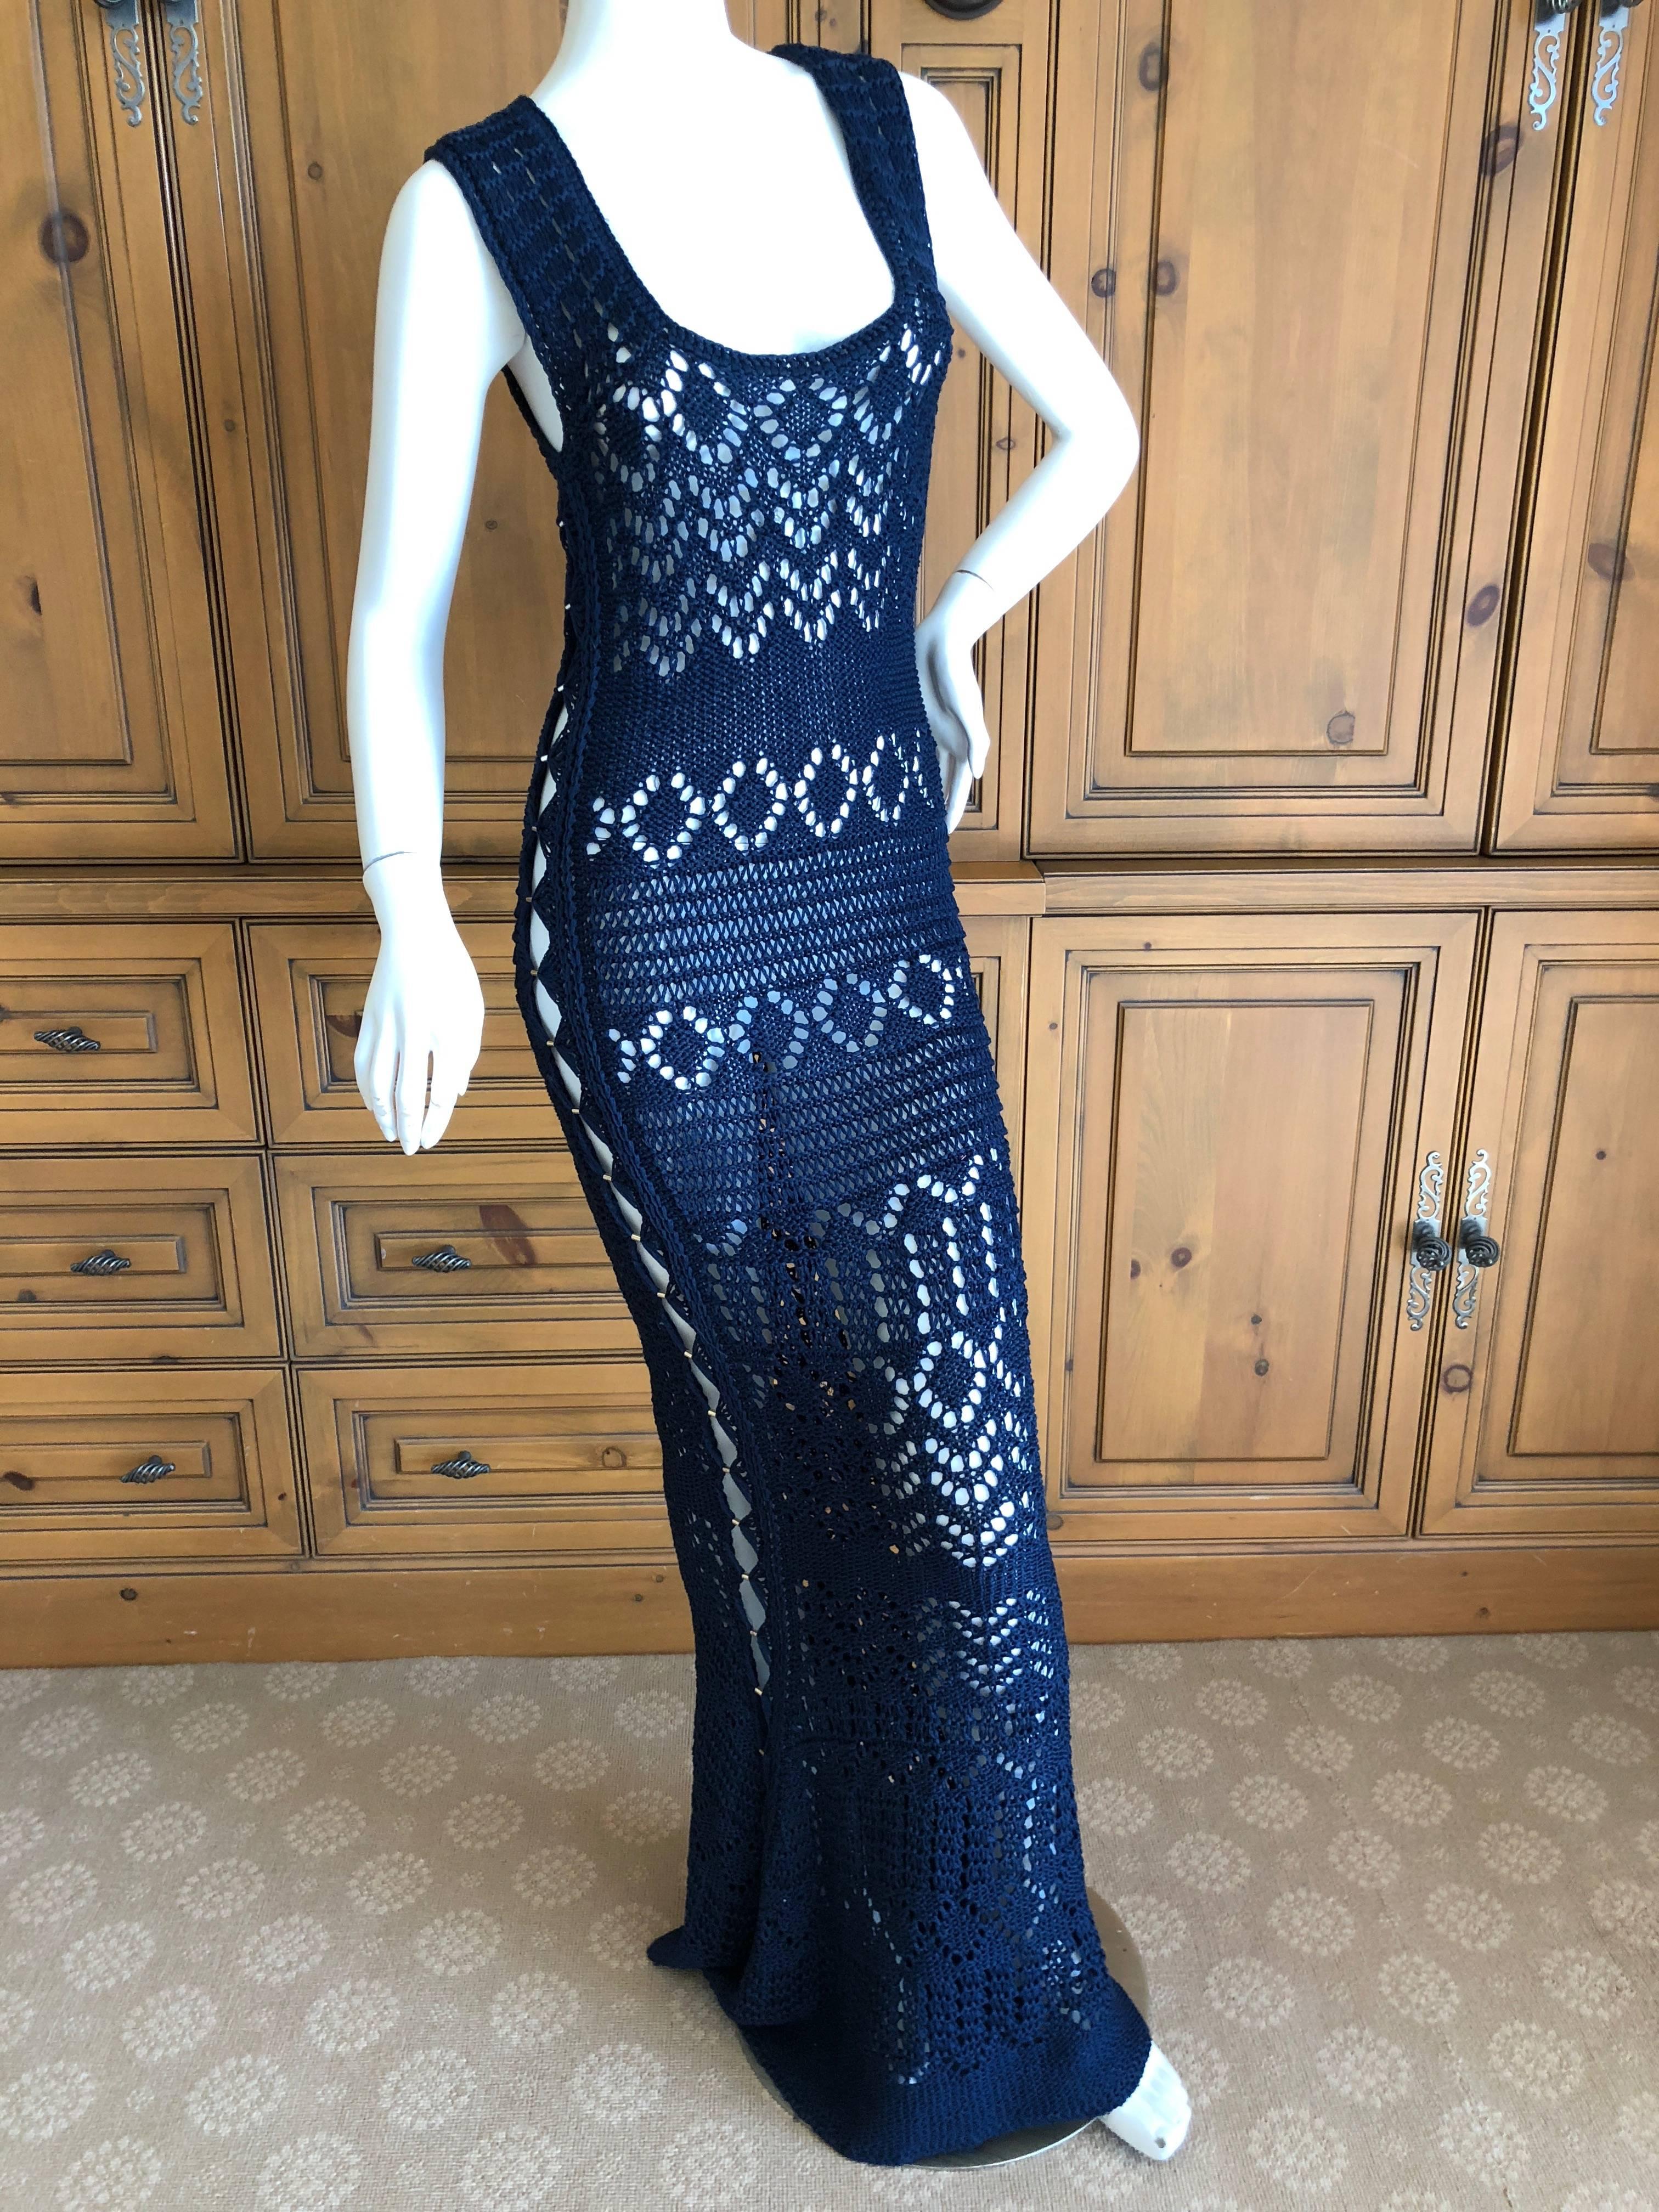 Emilio Pucci crochet knit evening dress in Navy Blue.
So sexy 
The size and fabric tags have been removed, appx sz 38
 Bust 36